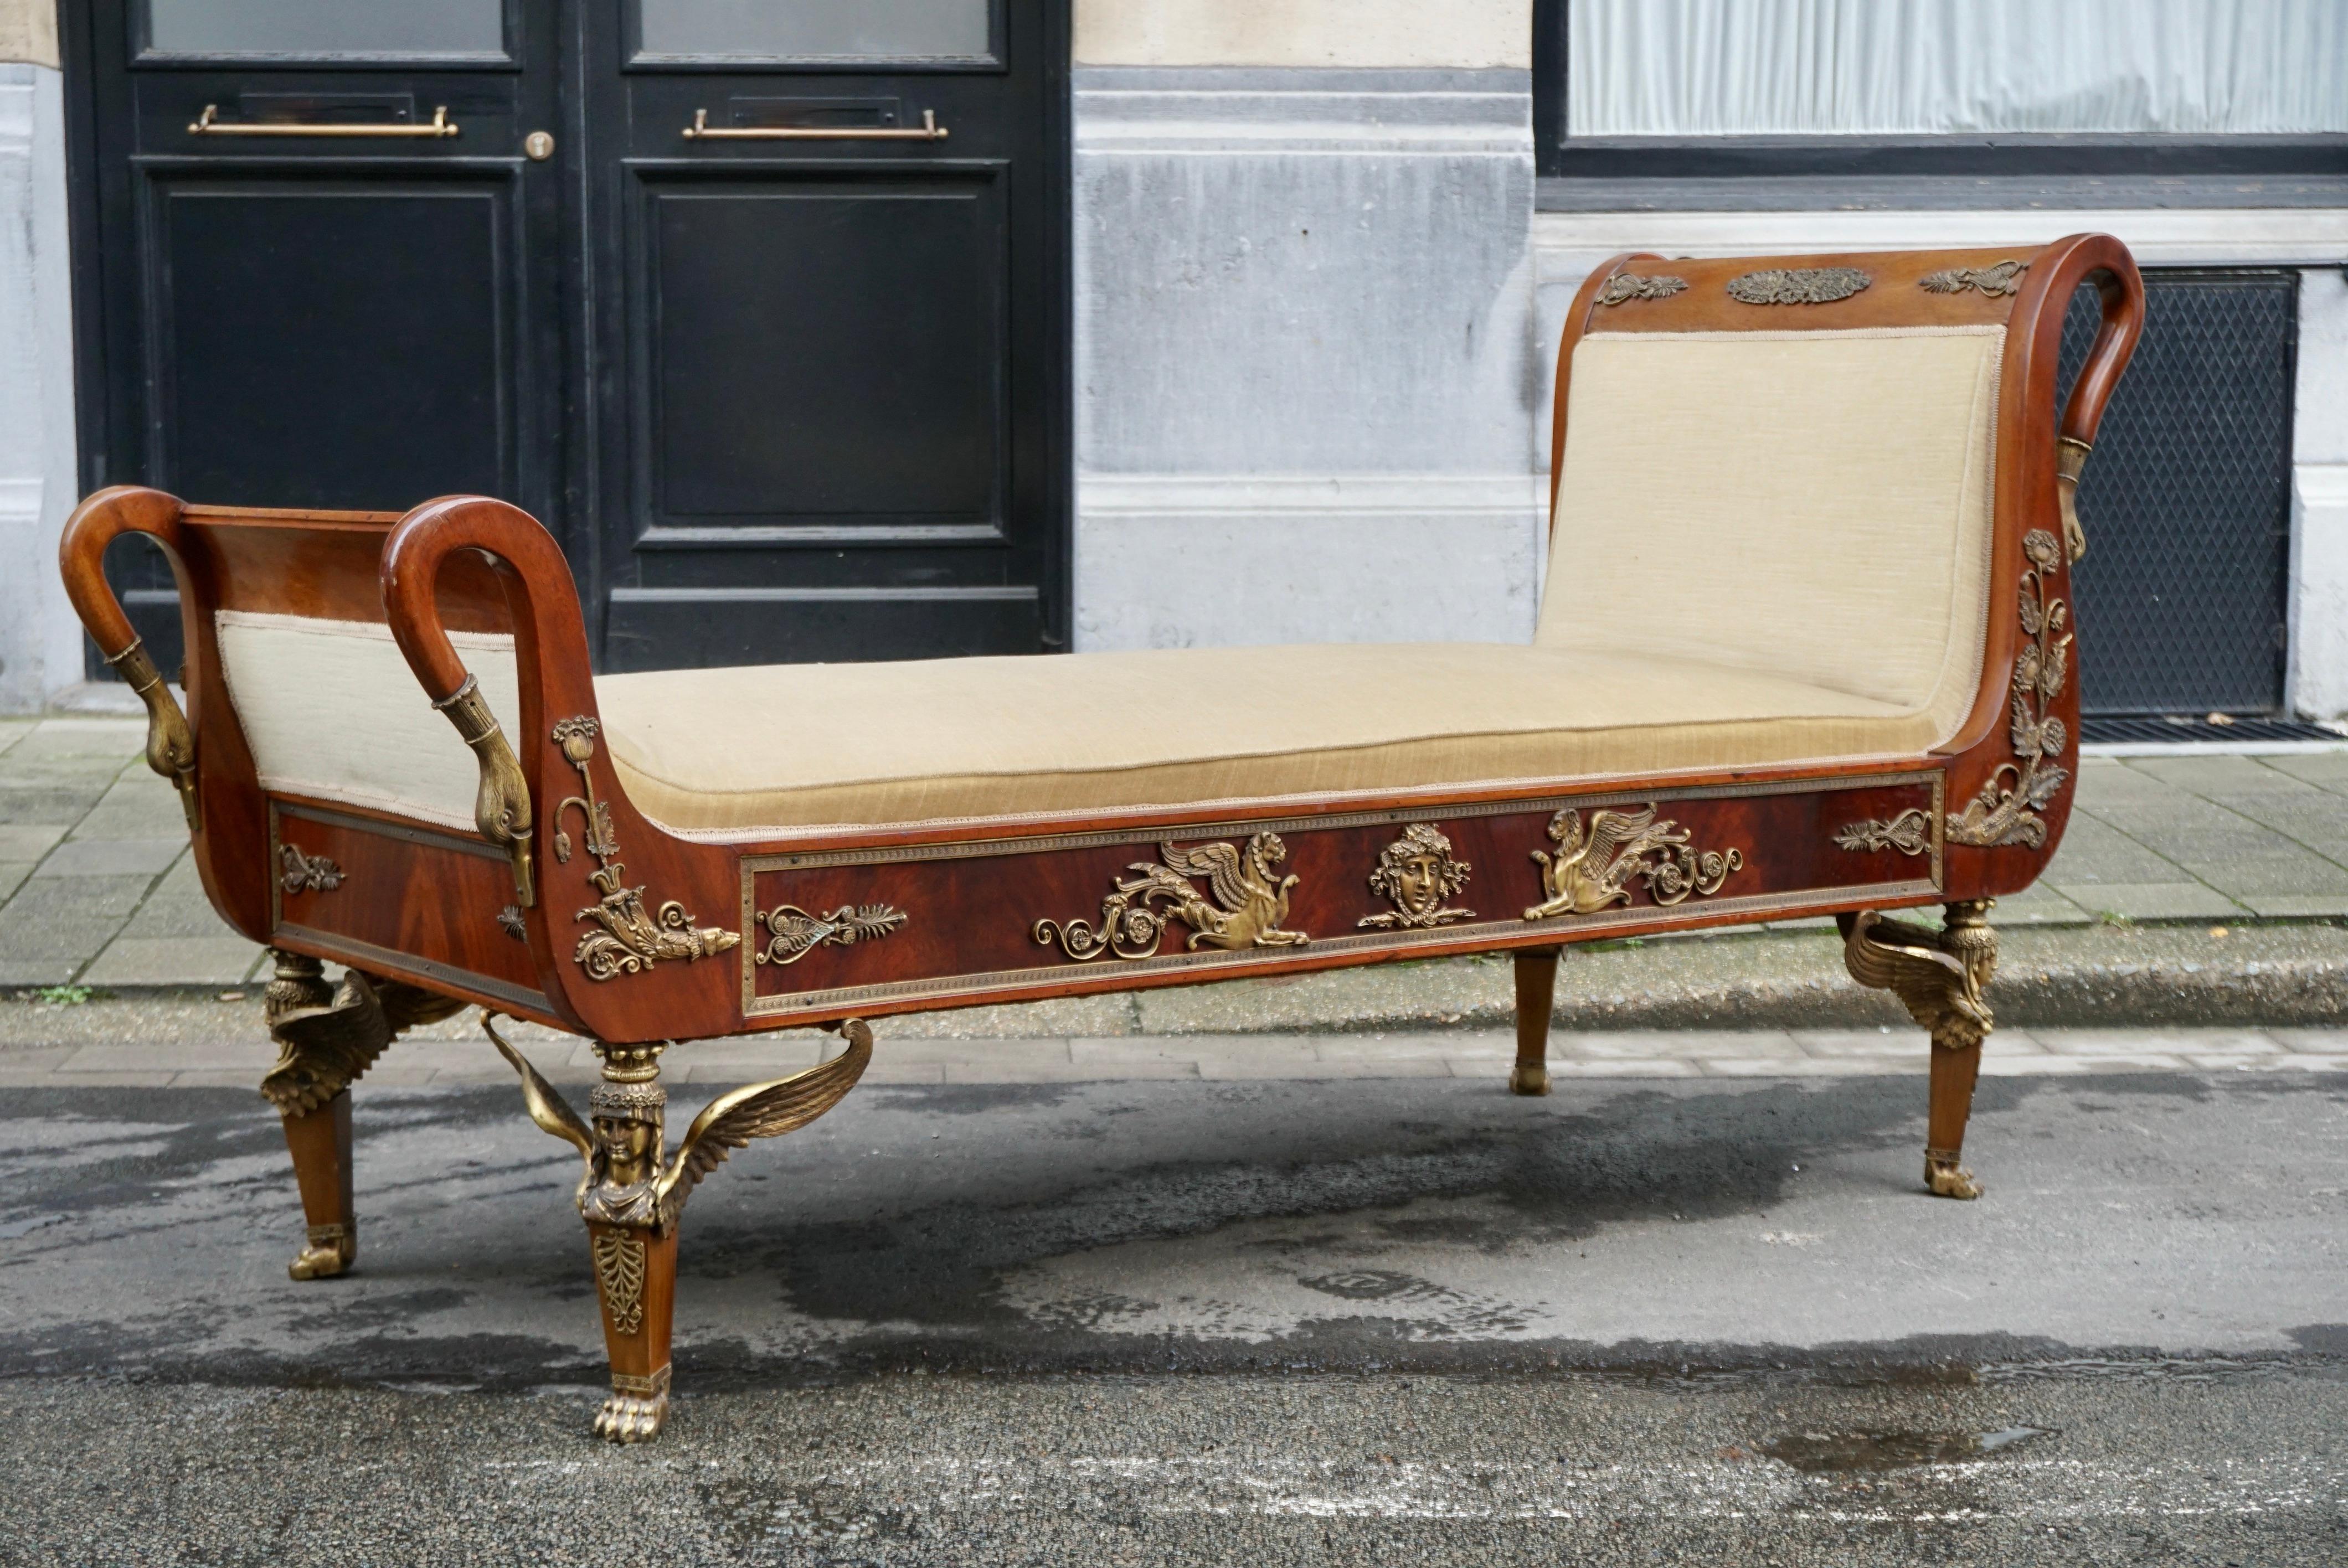 Incredible Gilt Bronze-Mounted Swan Neck Daybed in French Empire Style In Good Condition For Sale In Antwerp, BE